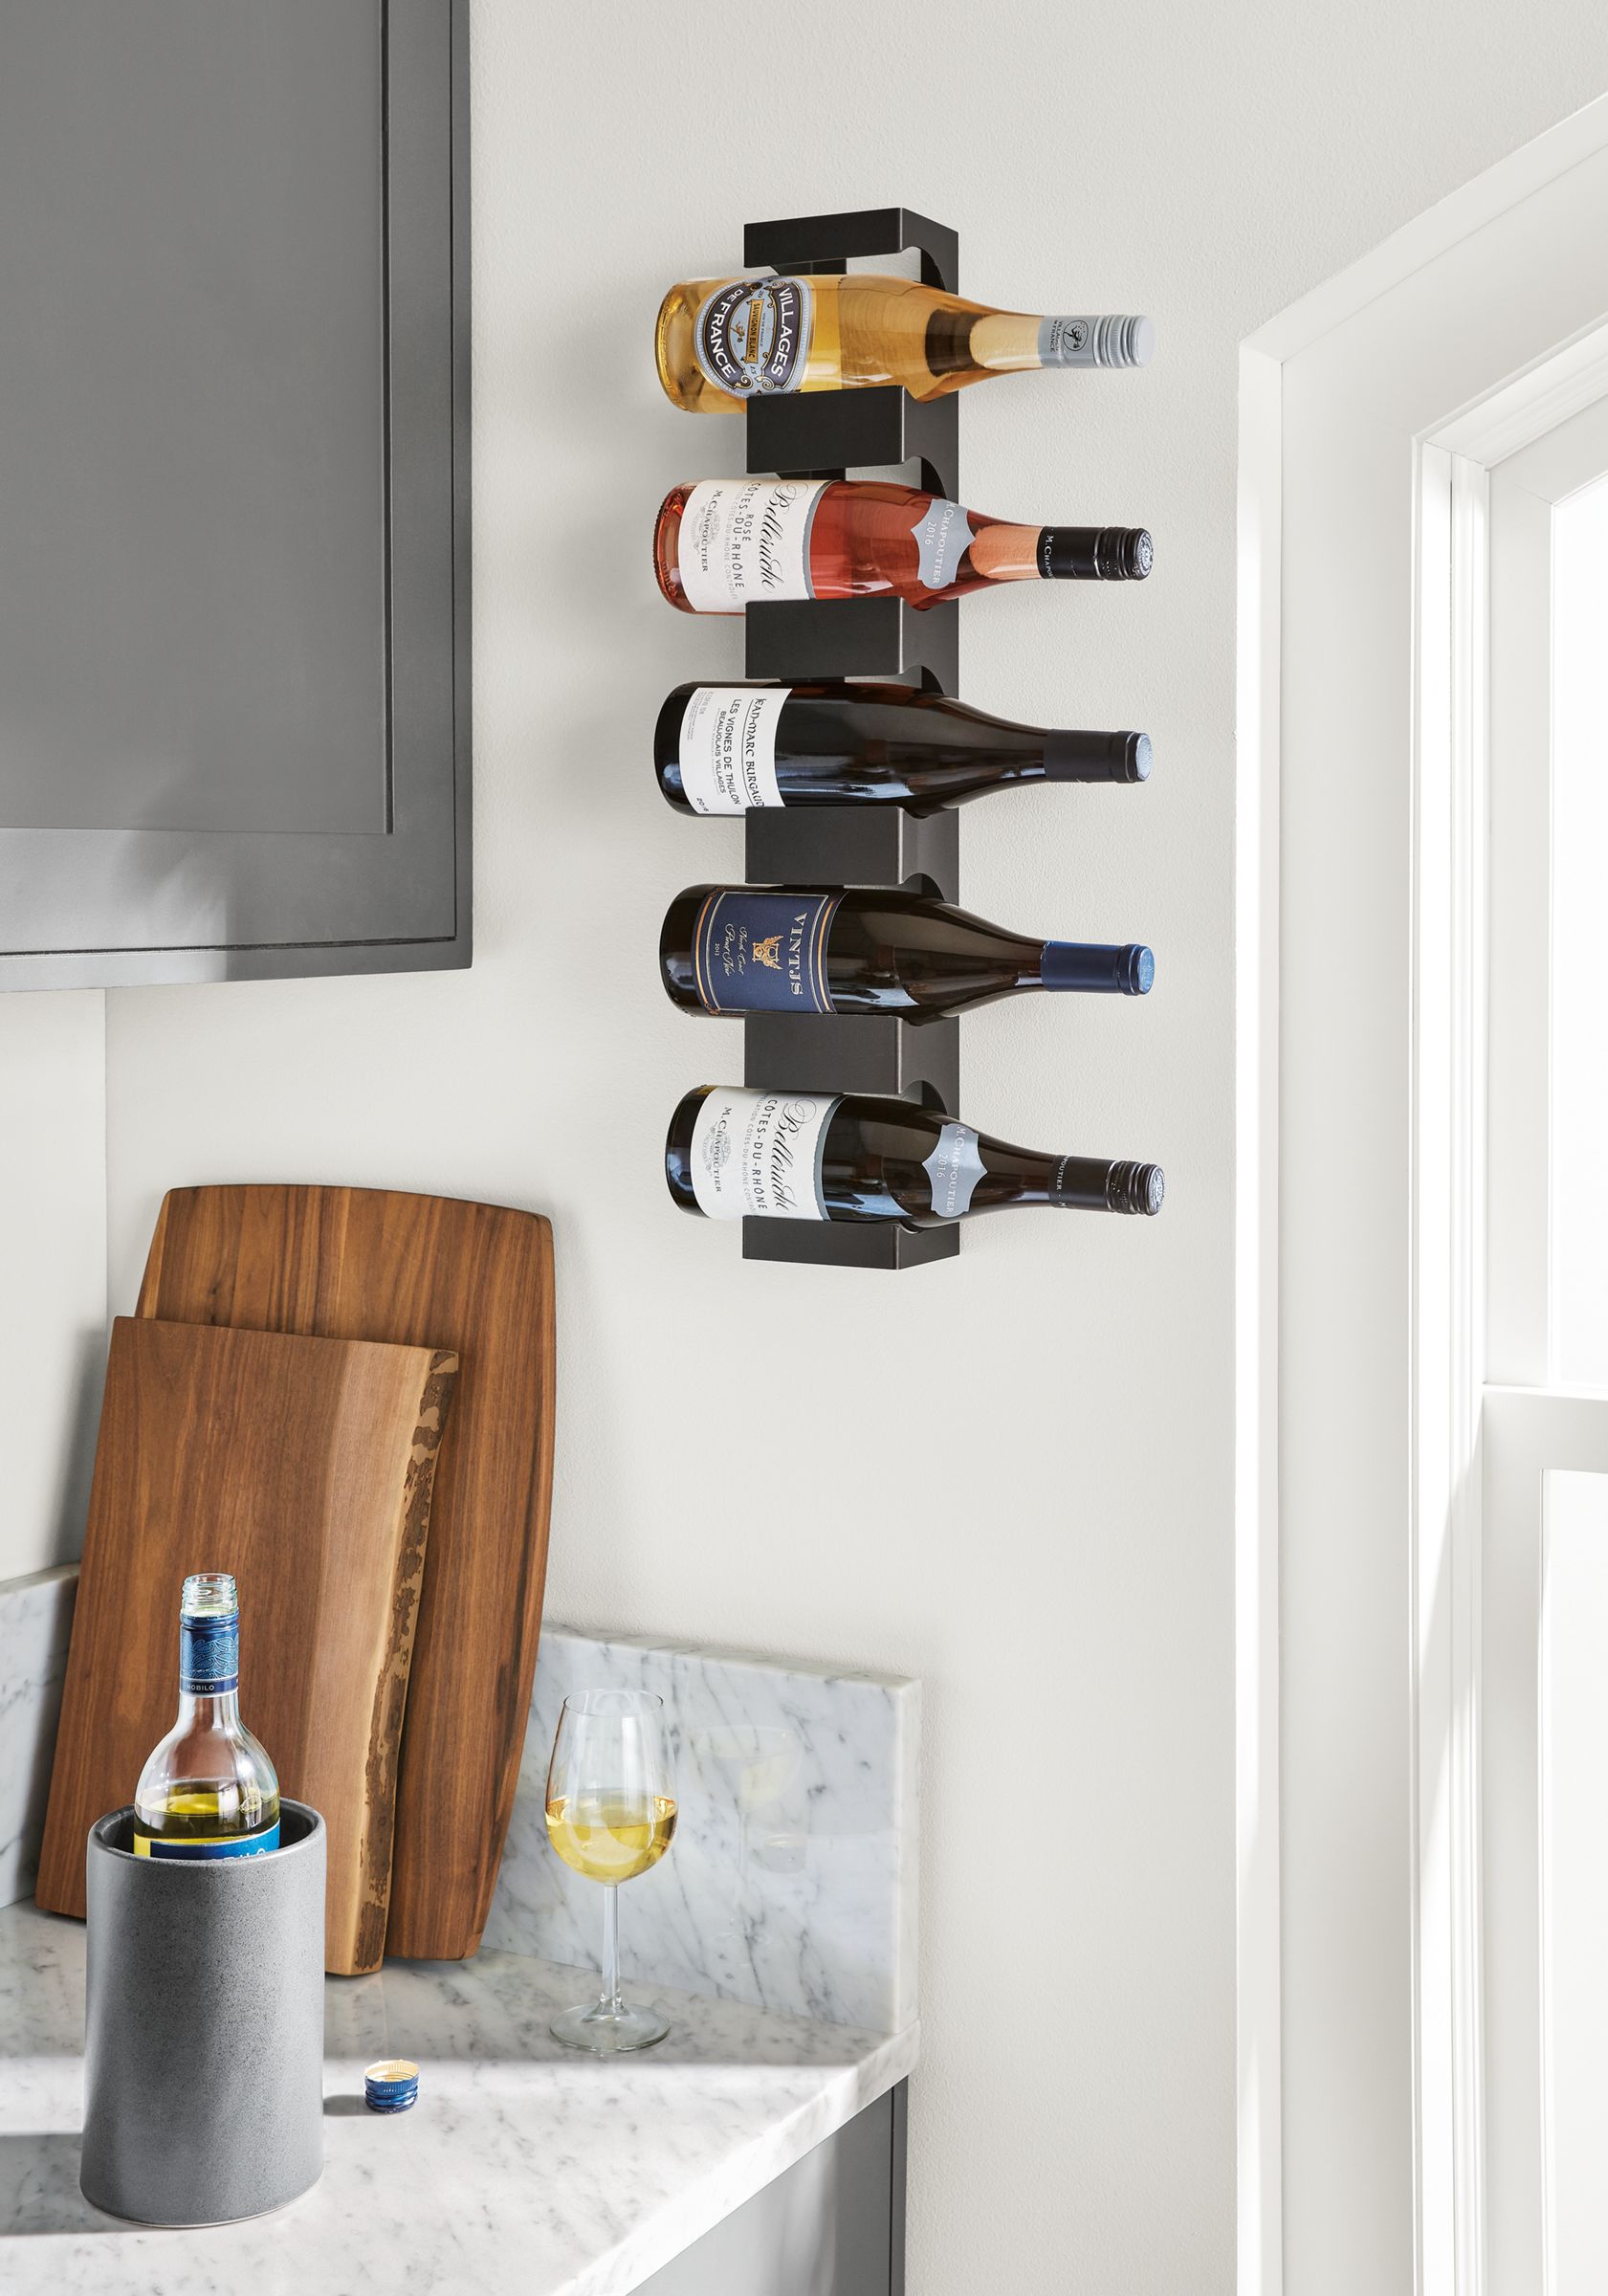 Detail of Dorsey wine rack on wall.